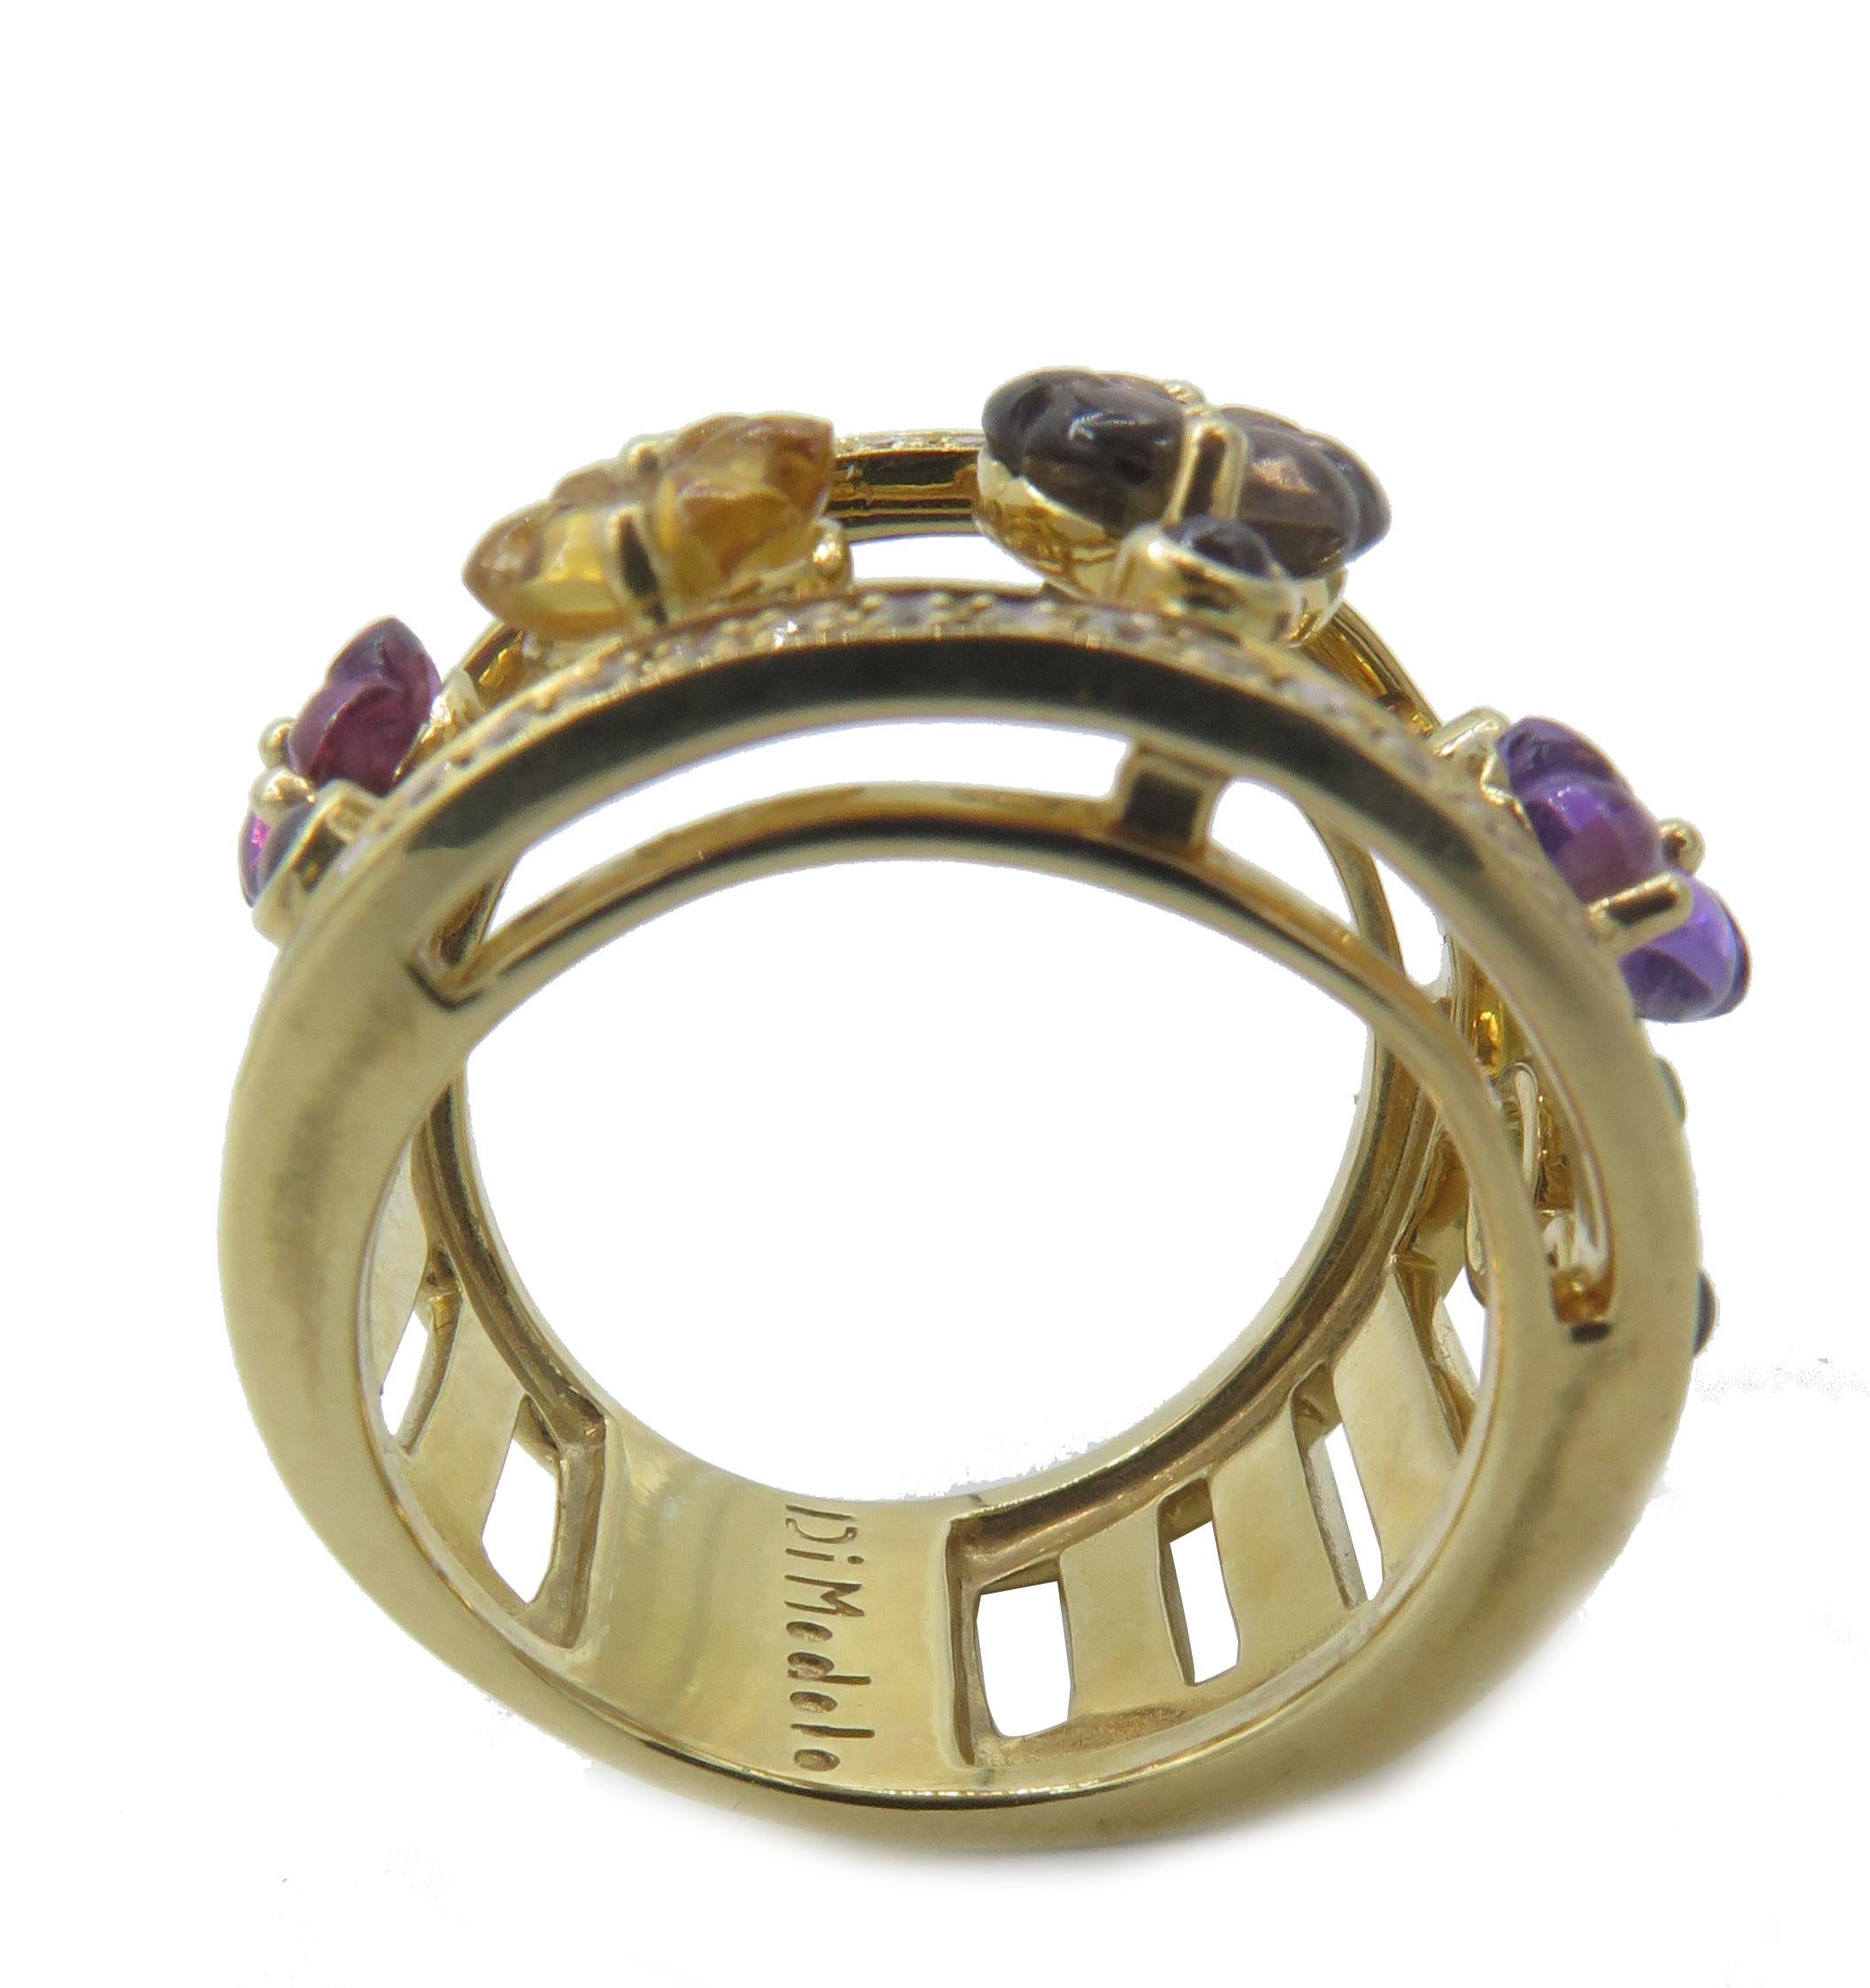 This stunning 18k gold Tempia Ring is from the Di Modolo Italian Fine Jewelry Collection. The outer edges of the ring are outlined with 0.35cts of pave white diamonds. The beautifully crafted multi-stone designs in the center of the band contain